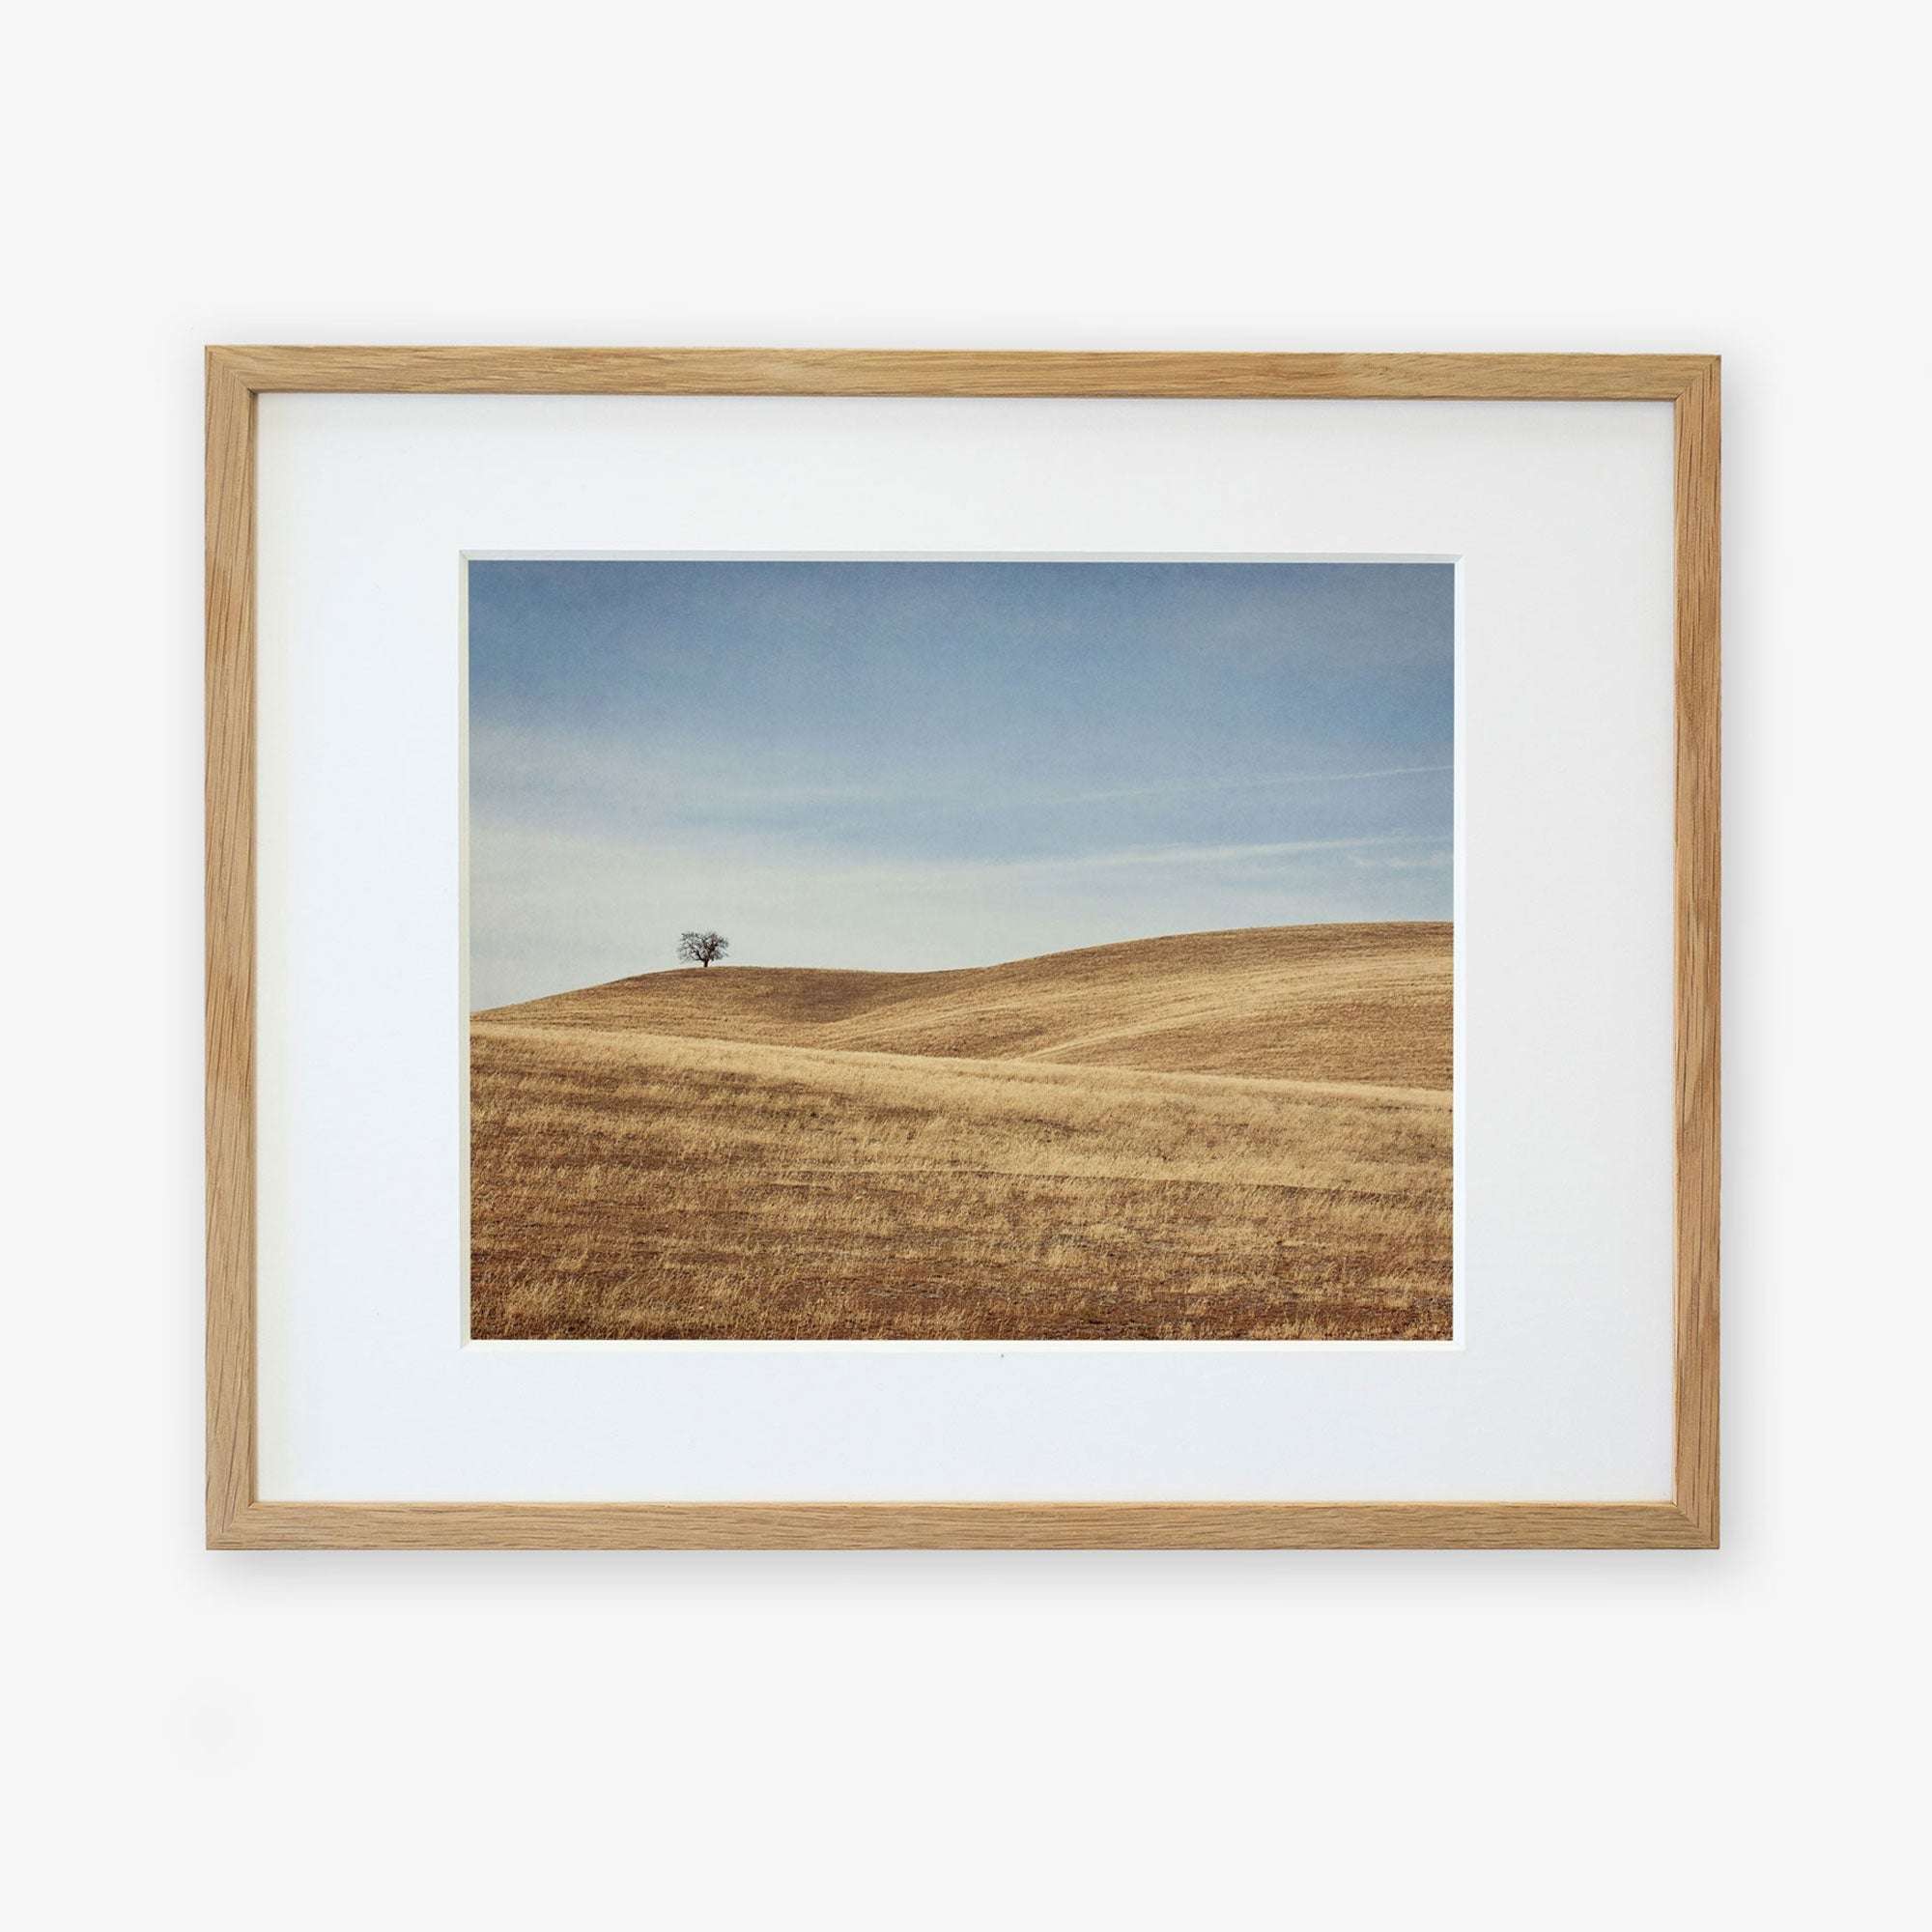 A framed photograph of a serene landscape featuring rolling golden hills and a solitary tree in the Santa Ynez Valley, displayed on a white background. This is the Offley Green California Central Coast Landscape Print 'Golden Ynez'.